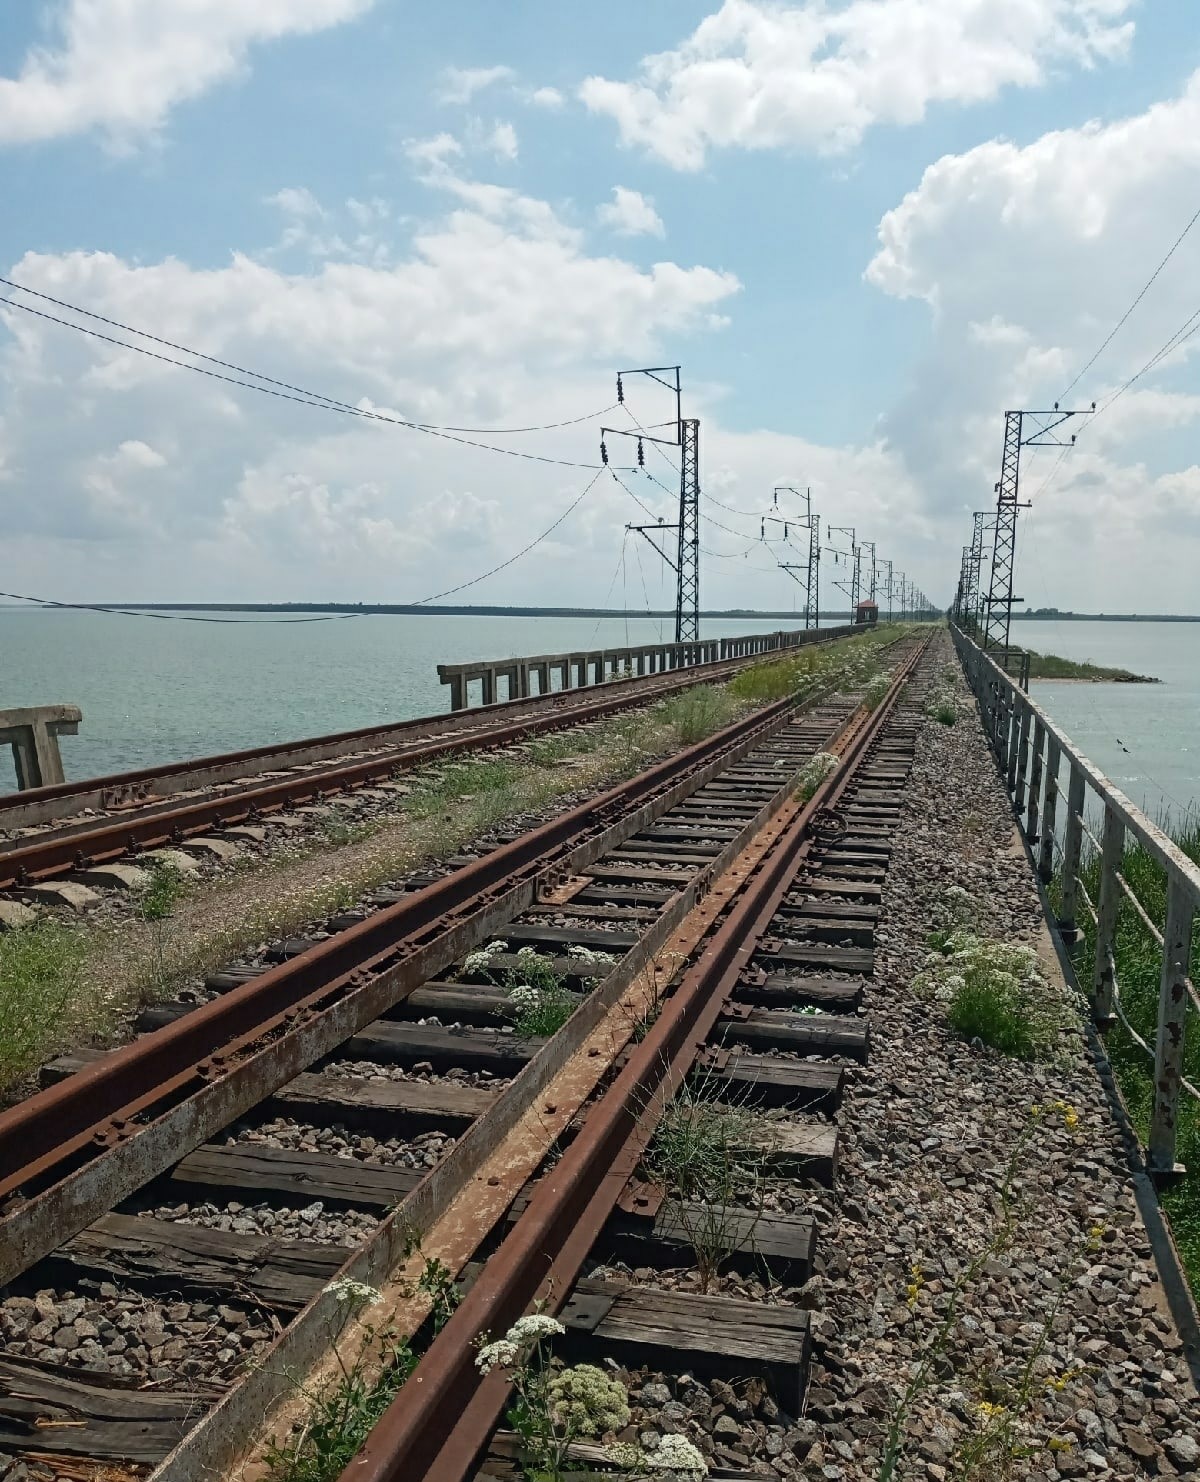 What the First Photo of Damaged Railway Bridge over Chongar in Crimea is Talking About, Chongar railway bridge, the photo was taken approximately in May 2022, Defense Express